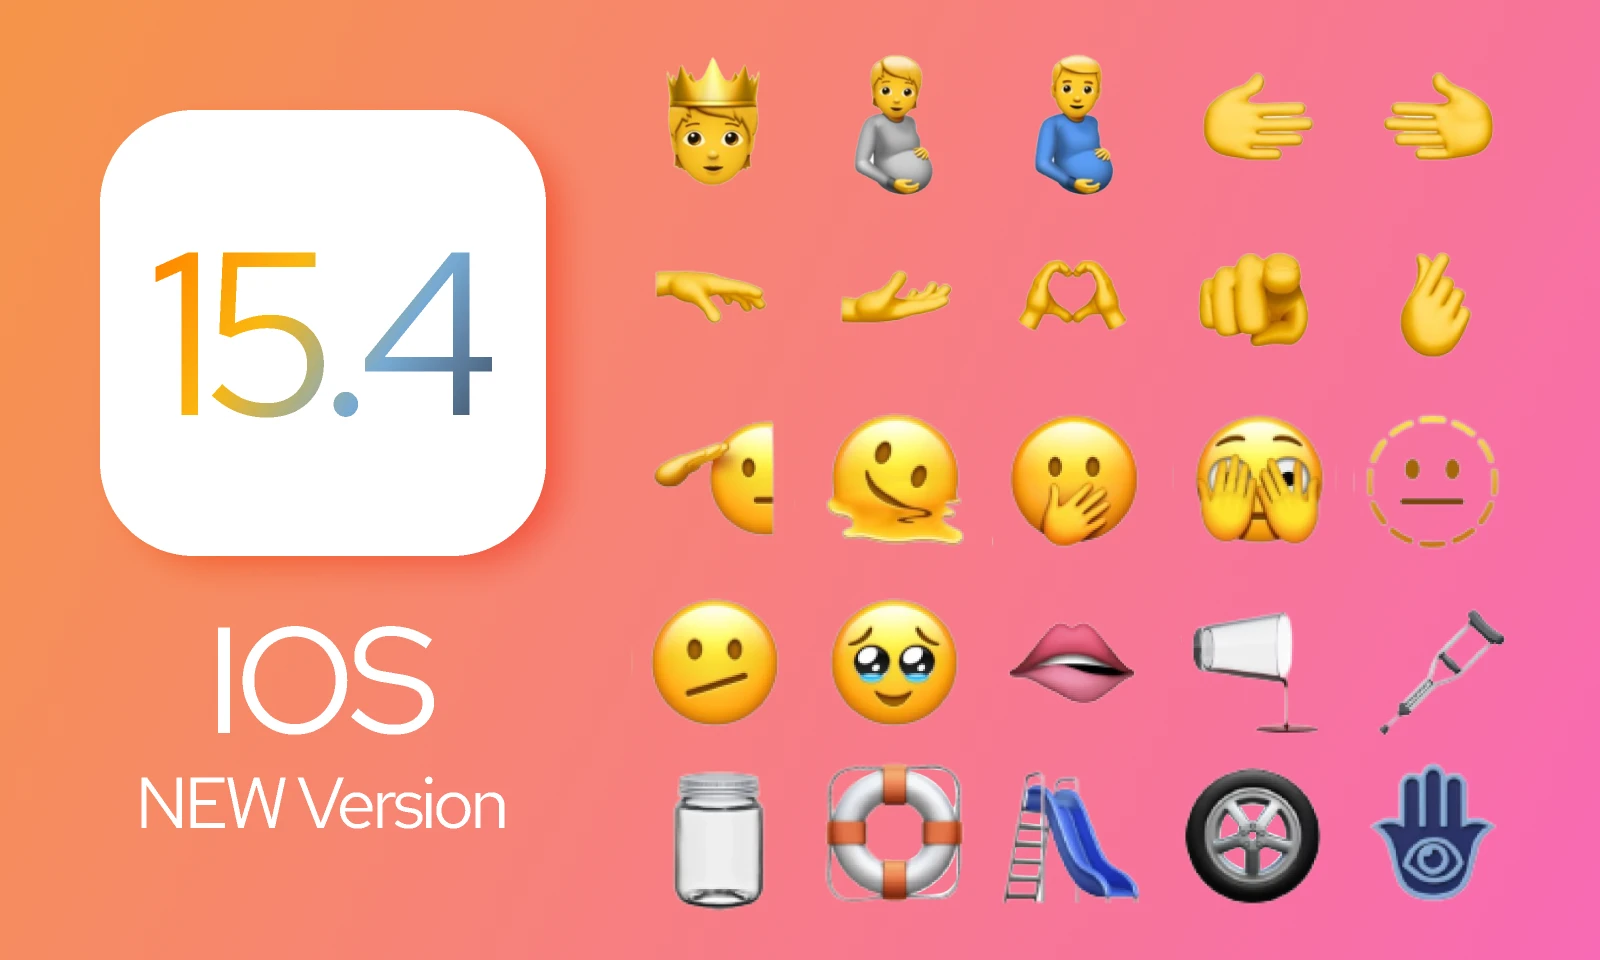 NEW emoji 15.4 IOS version for Figma and Adobe XD